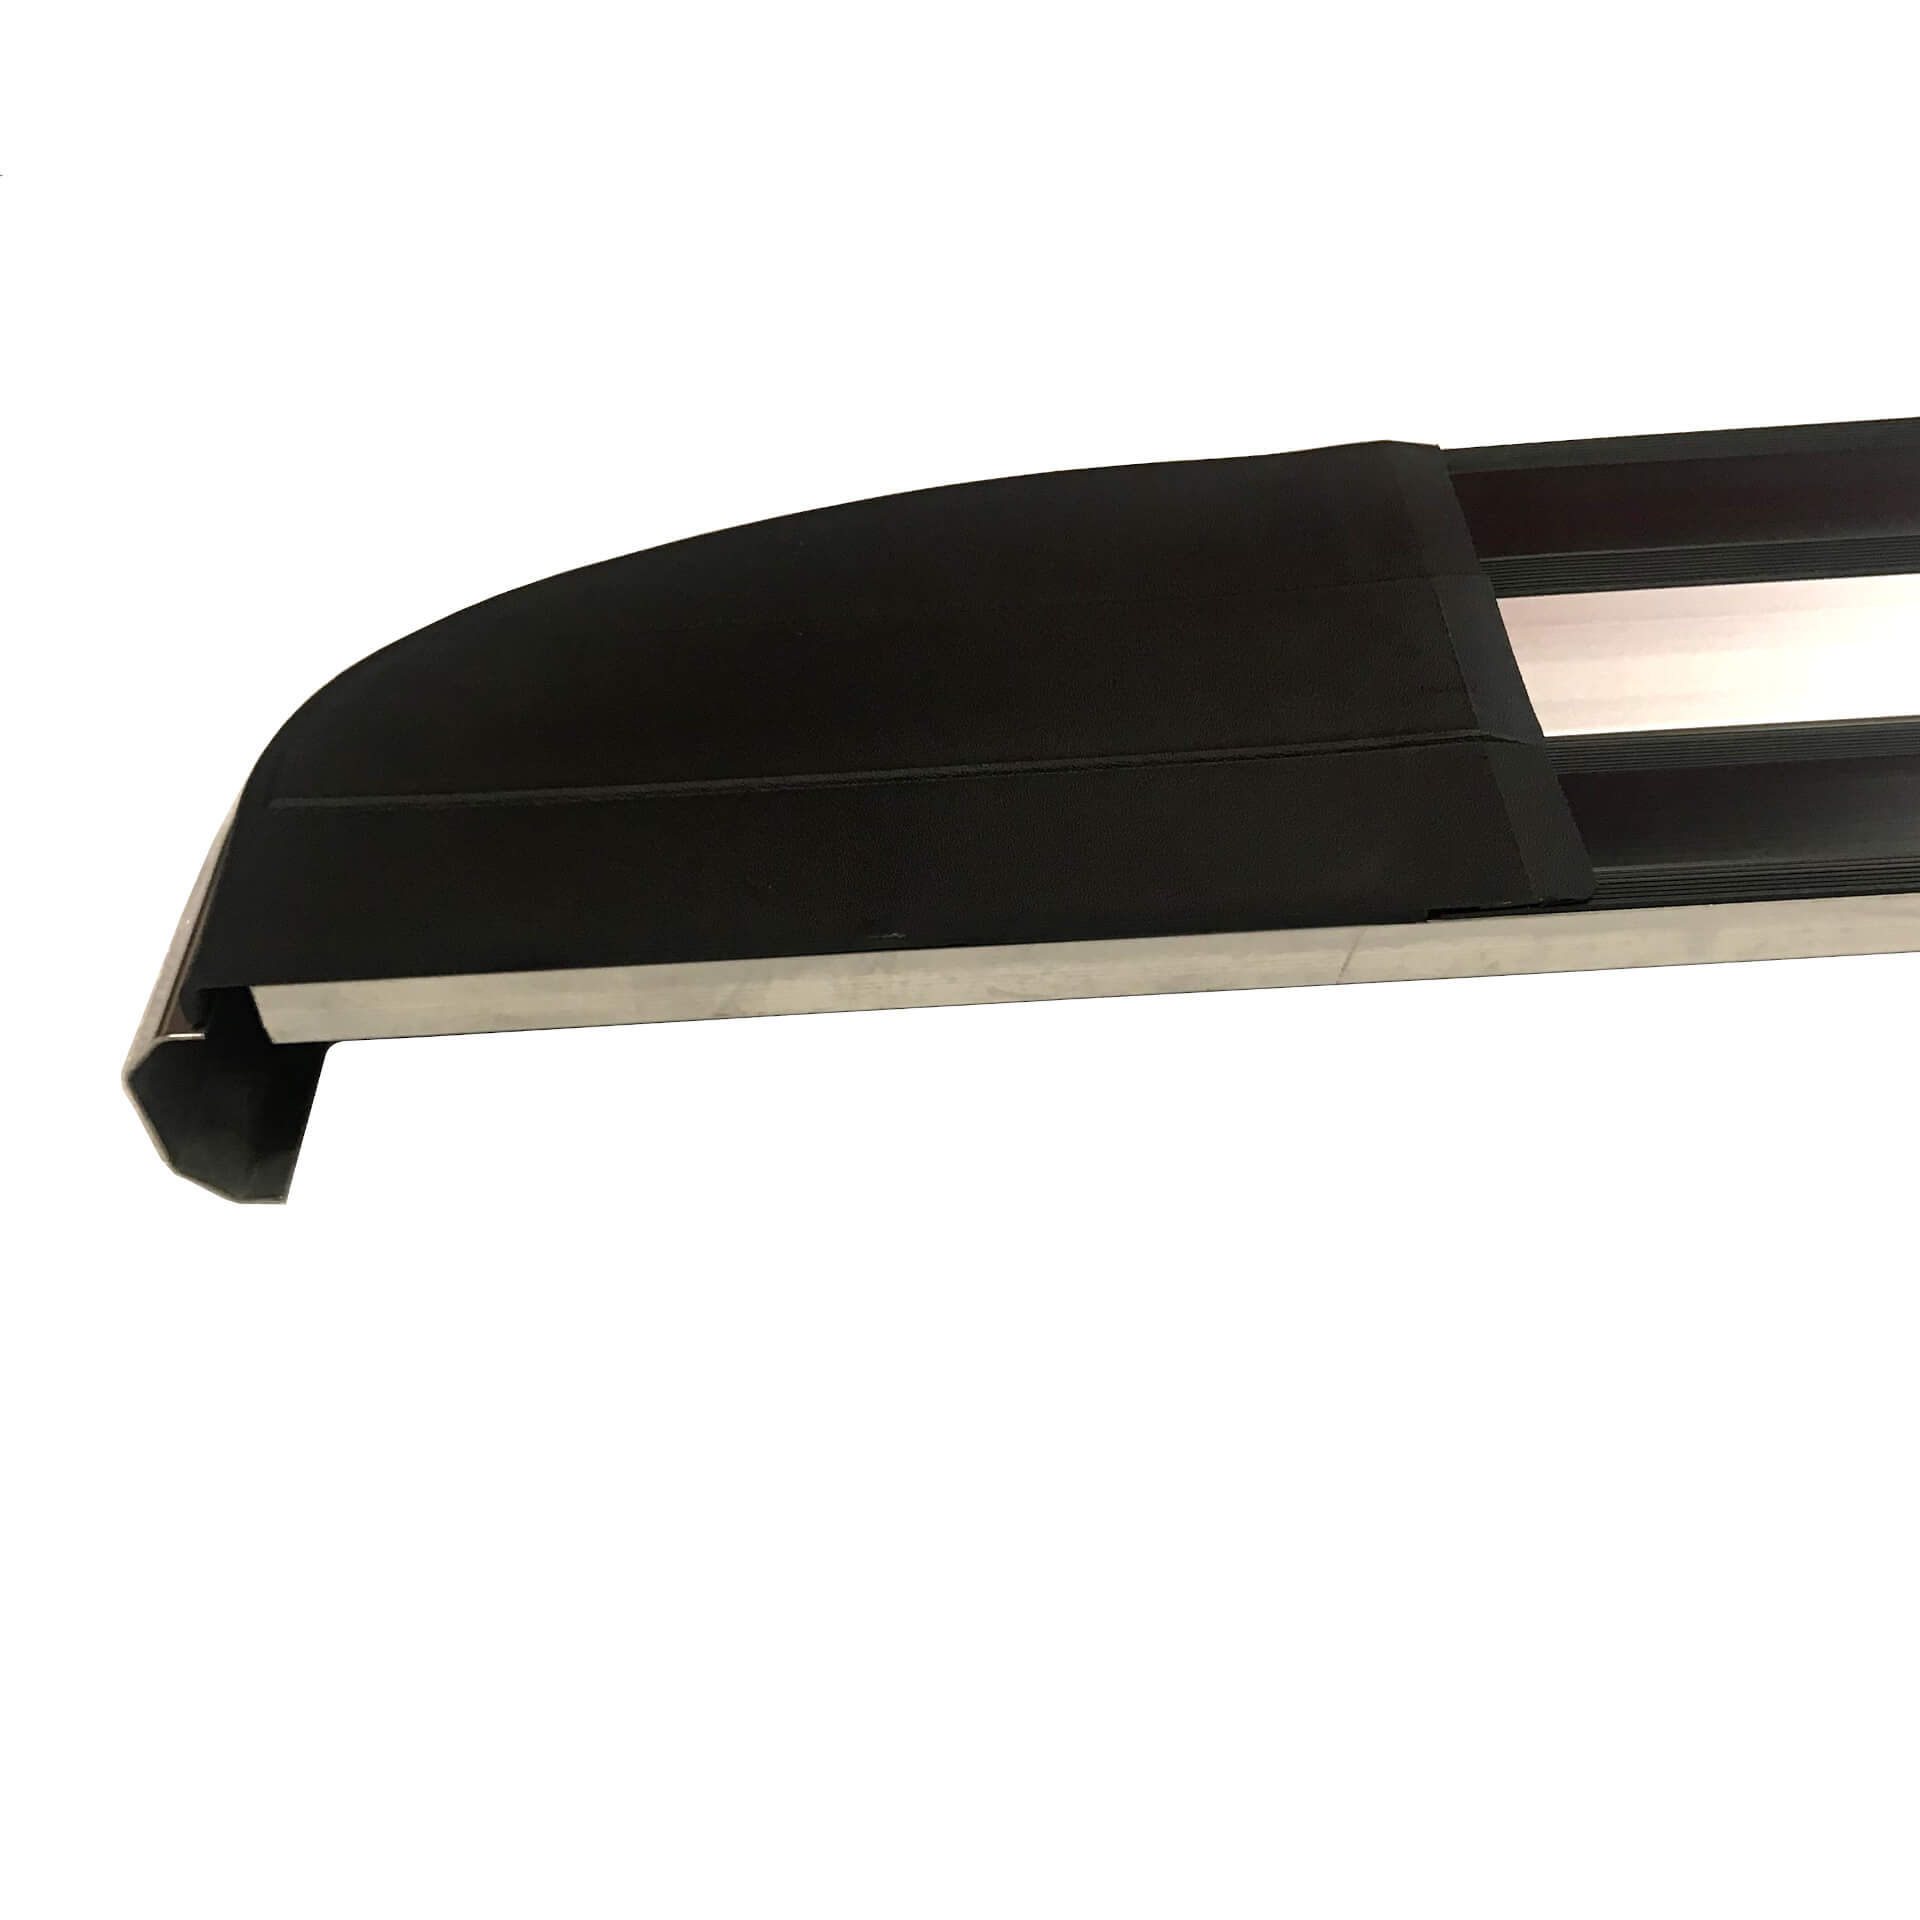 Panther Side Steps Running Boards for Toyota RAV4 2013-2015 -  - sold by Direct4x4